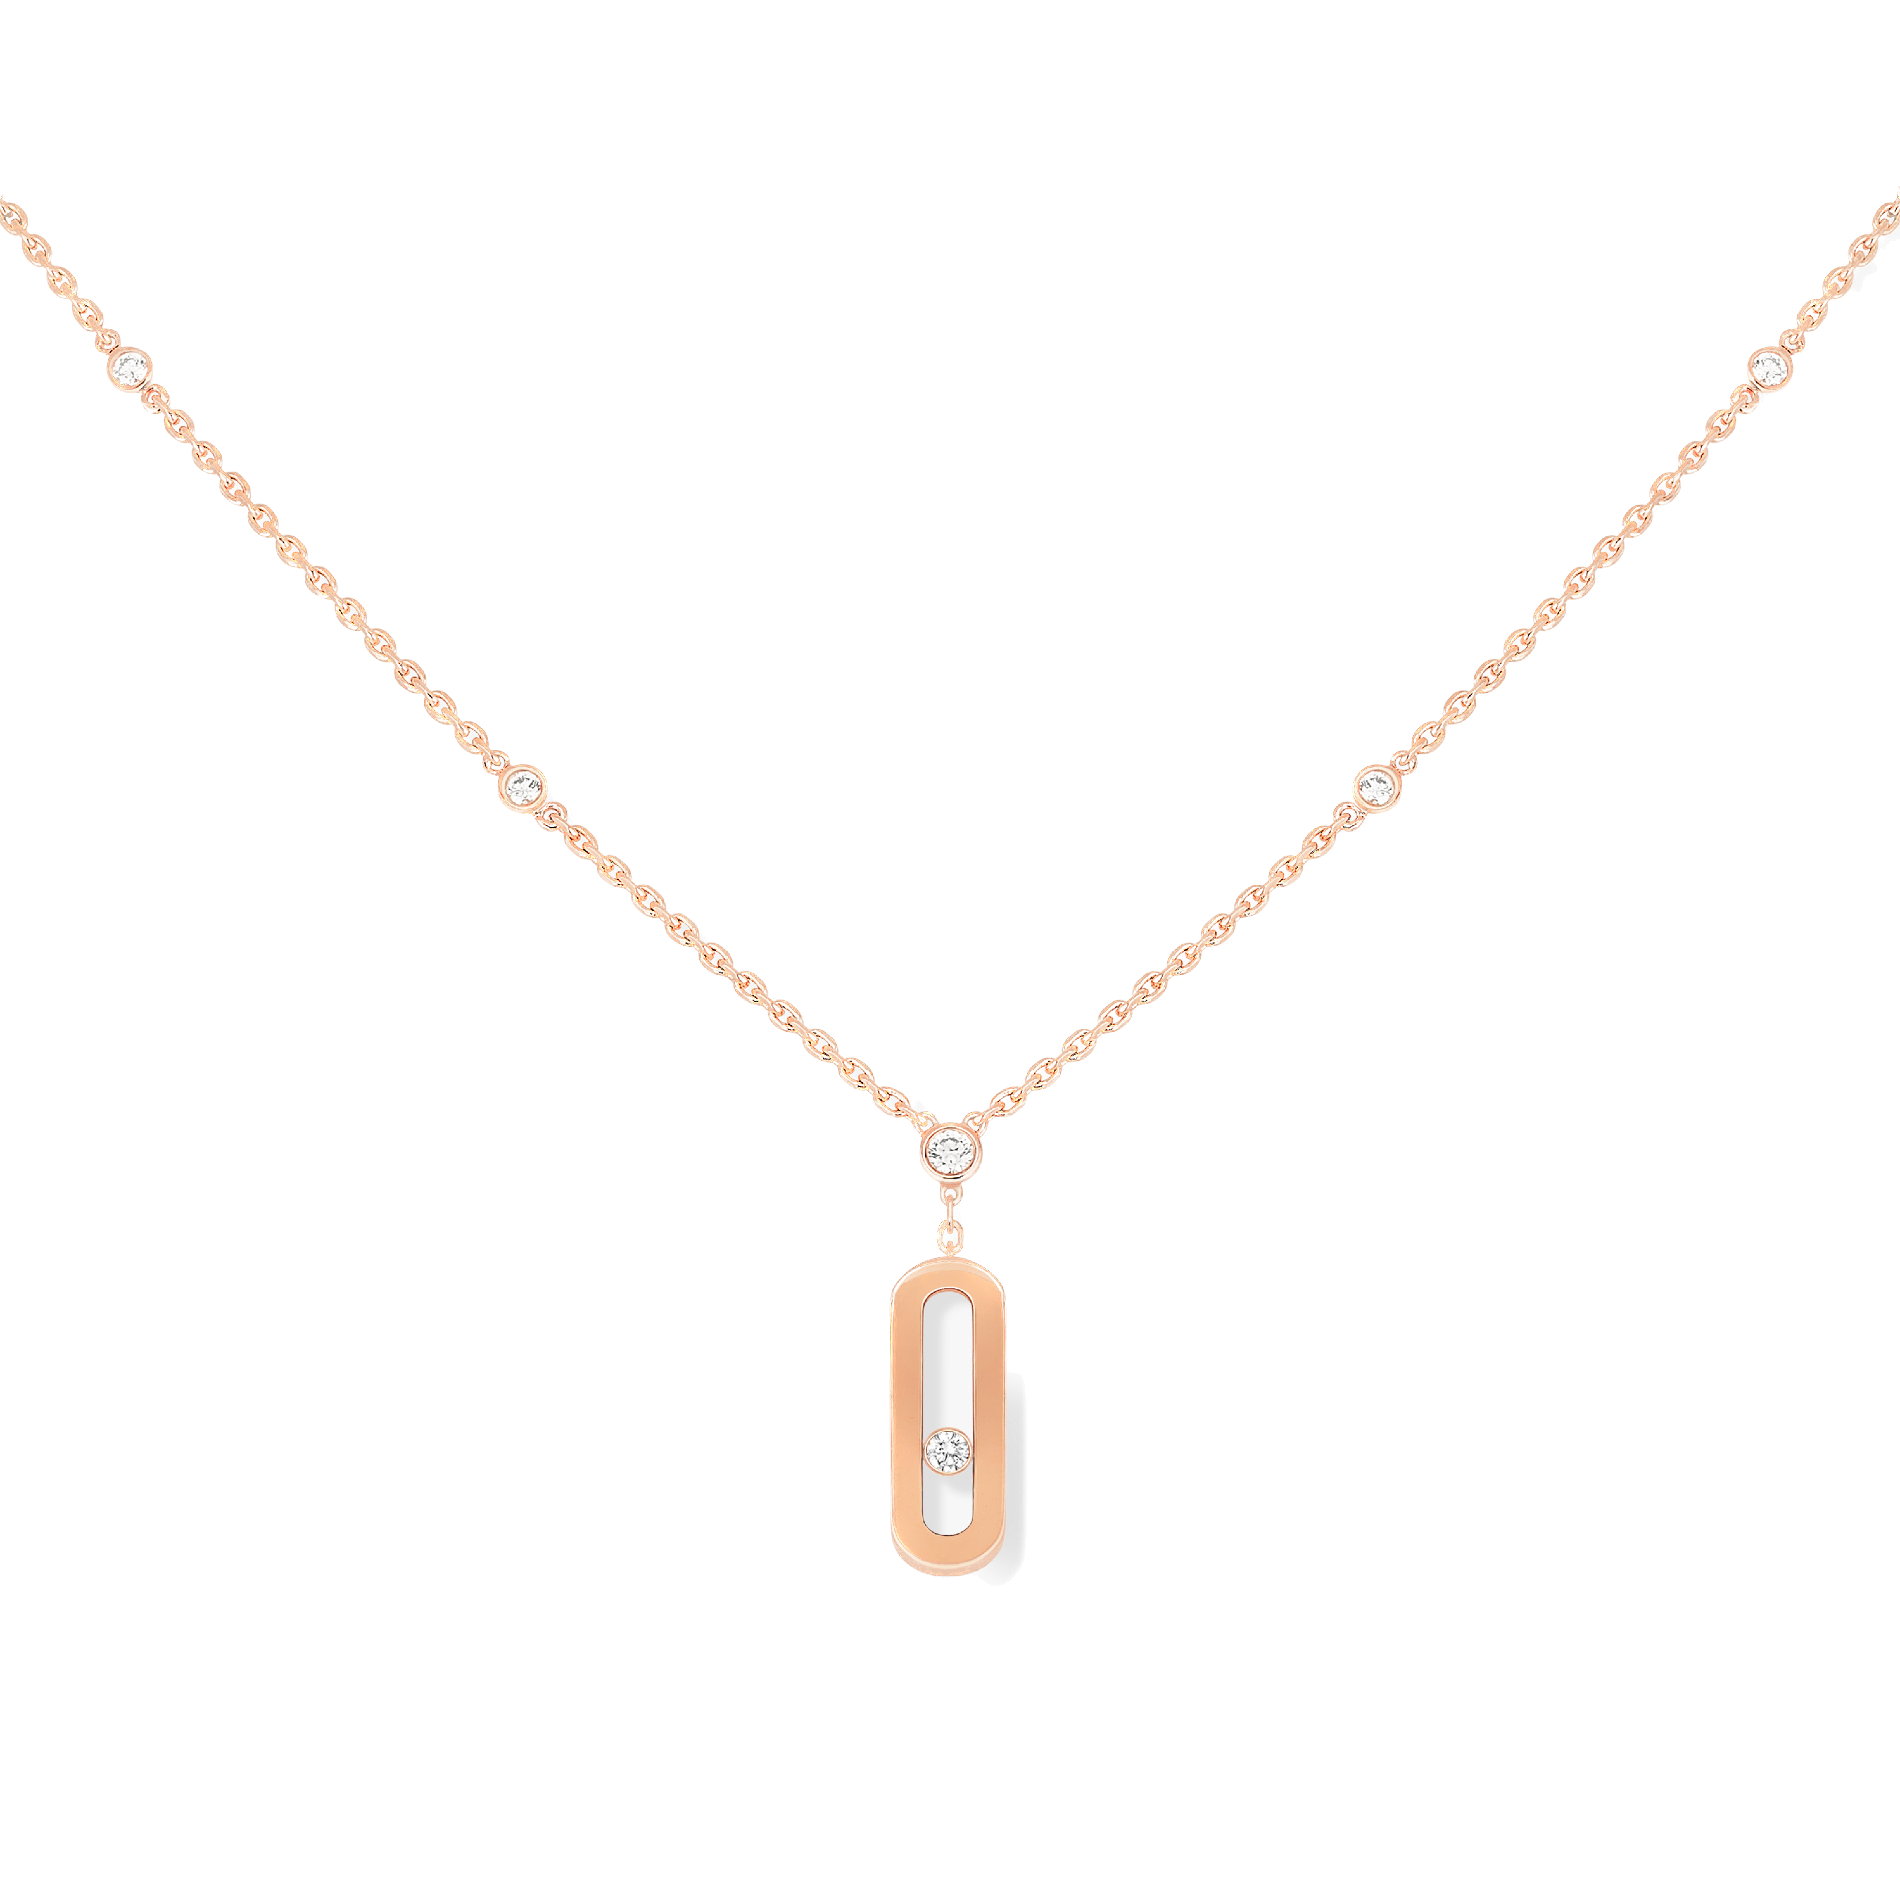 MESSIKA PINK GOLD DIAMOND NECKLACE MOVE UNO LONG NECKLACE 10111-PG